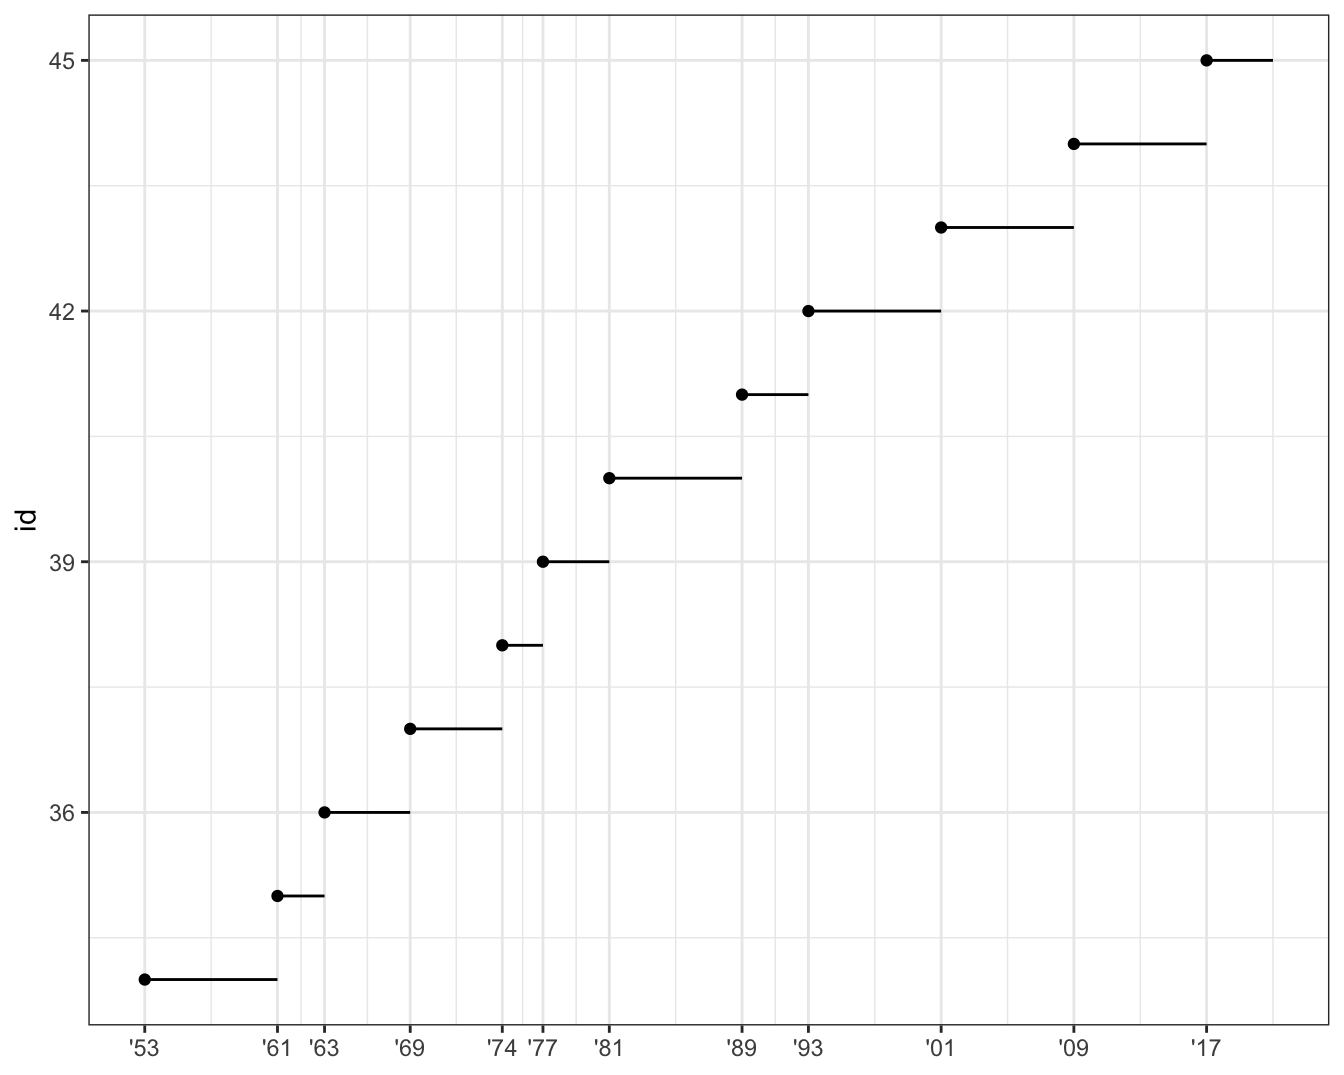 Line plot of id number of presidents versus the year they started their
presidency. Start year is marked with a point and a segment that starts
there and ends at the end of the presidency. The x-axis labels are
formatted as two digit years starting with an apostrophe, e.g., '53.